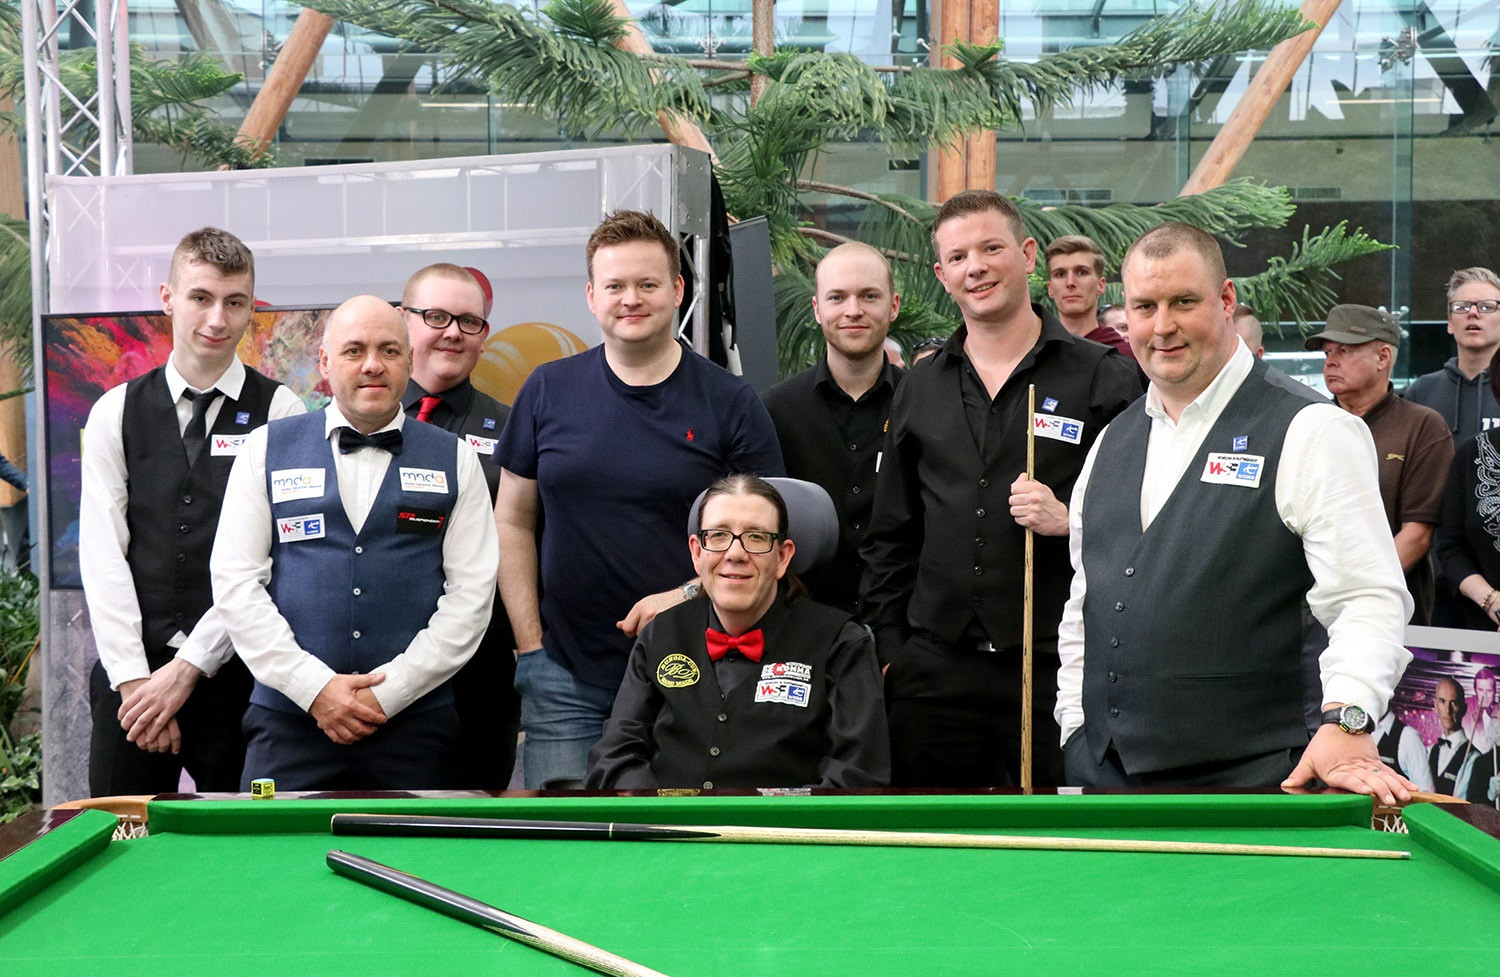 The World Disability Snooker Day is set to take place in Sheffield on April 20 ©WPBSA